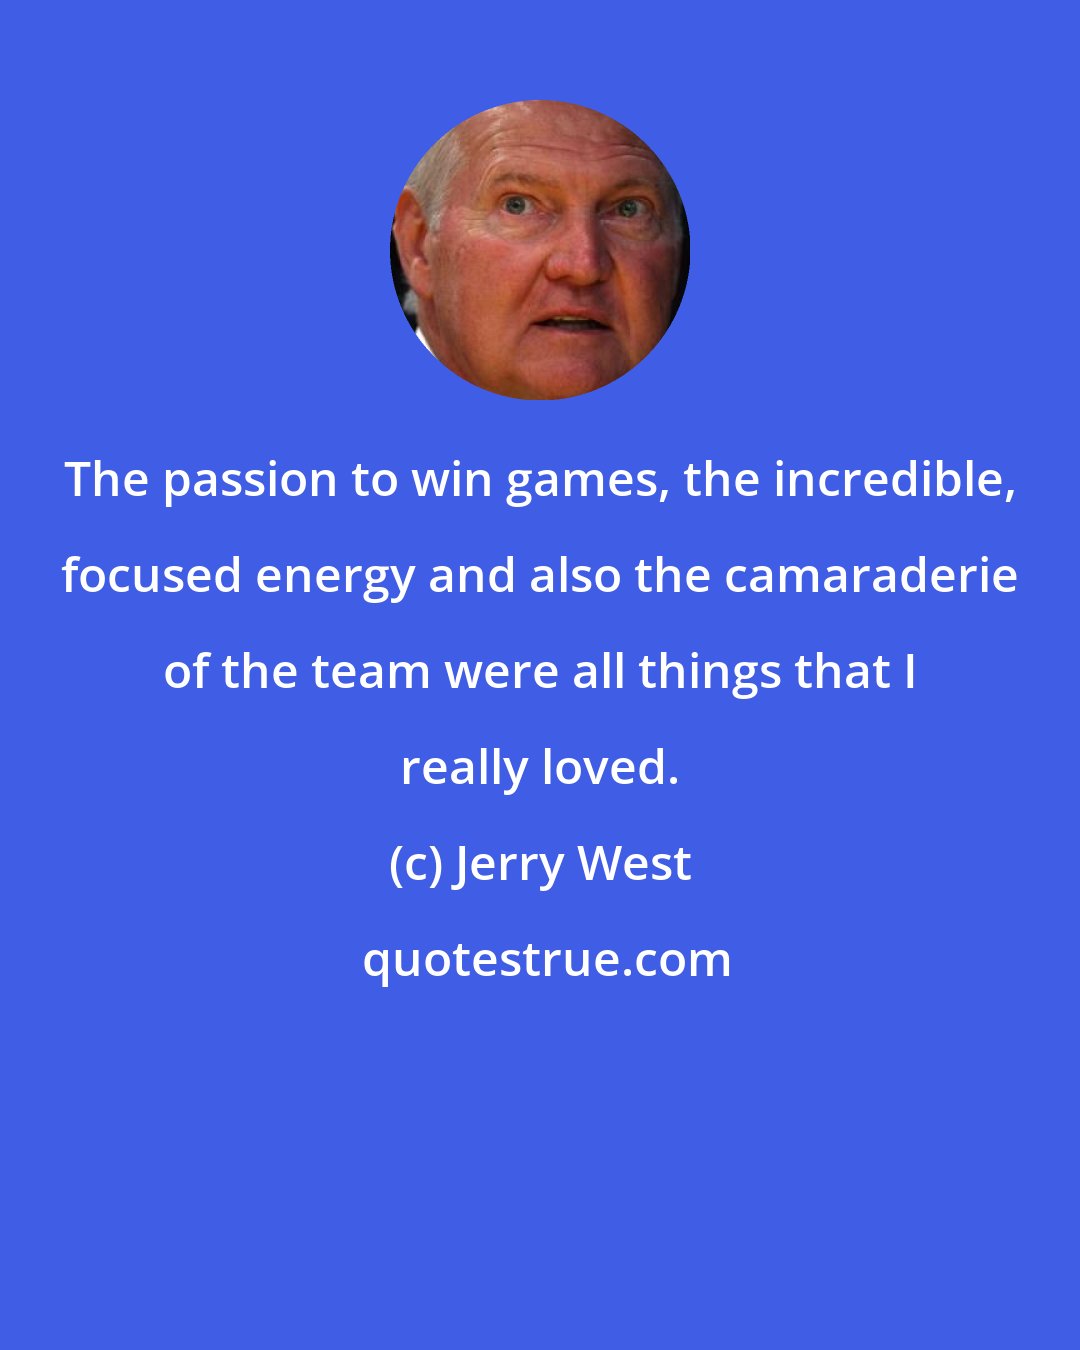 Jerry West: The passion to win games, the incredible, focused energy and also the camaraderie of the team were all things that I really loved.